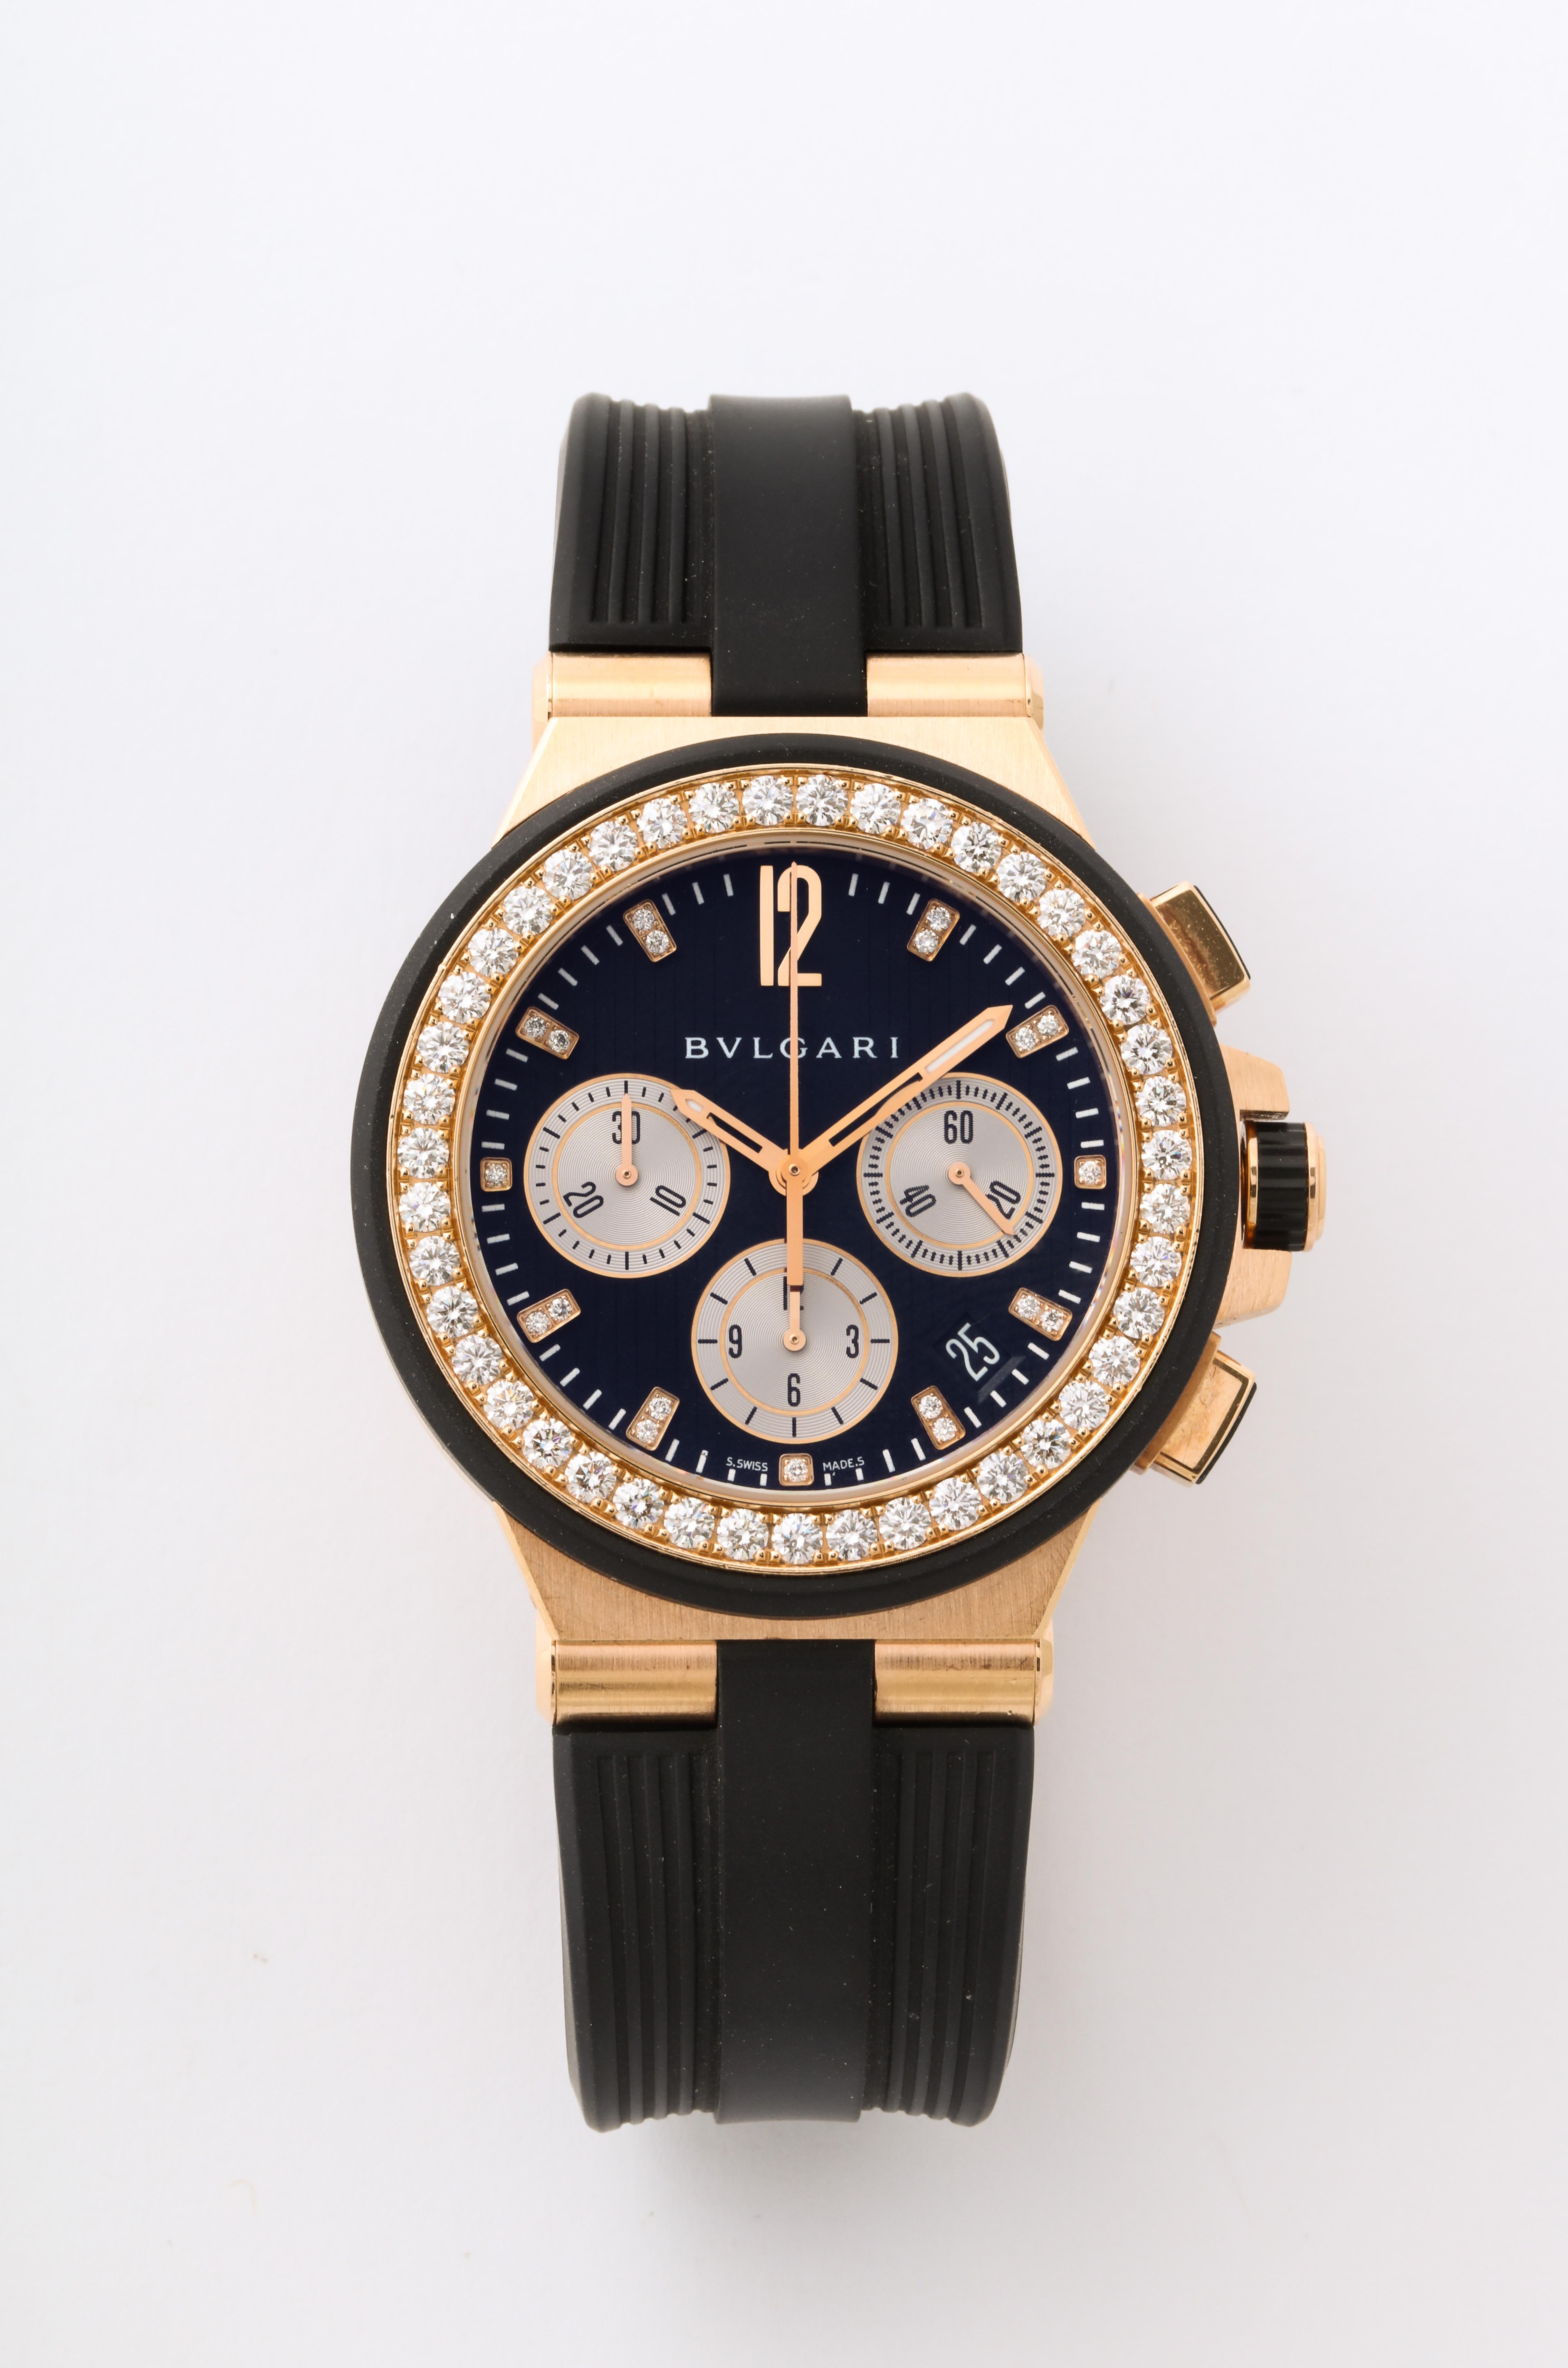 Pre-Owned Bulgari Diagono Chronograph automatic watch.
40mm 18k rose gold case with a diamond bezel and a black dial with diamond markers on a black rubber strap. 
Functions: date, chronograph, hours, minutes, and small-seconds.
Reference